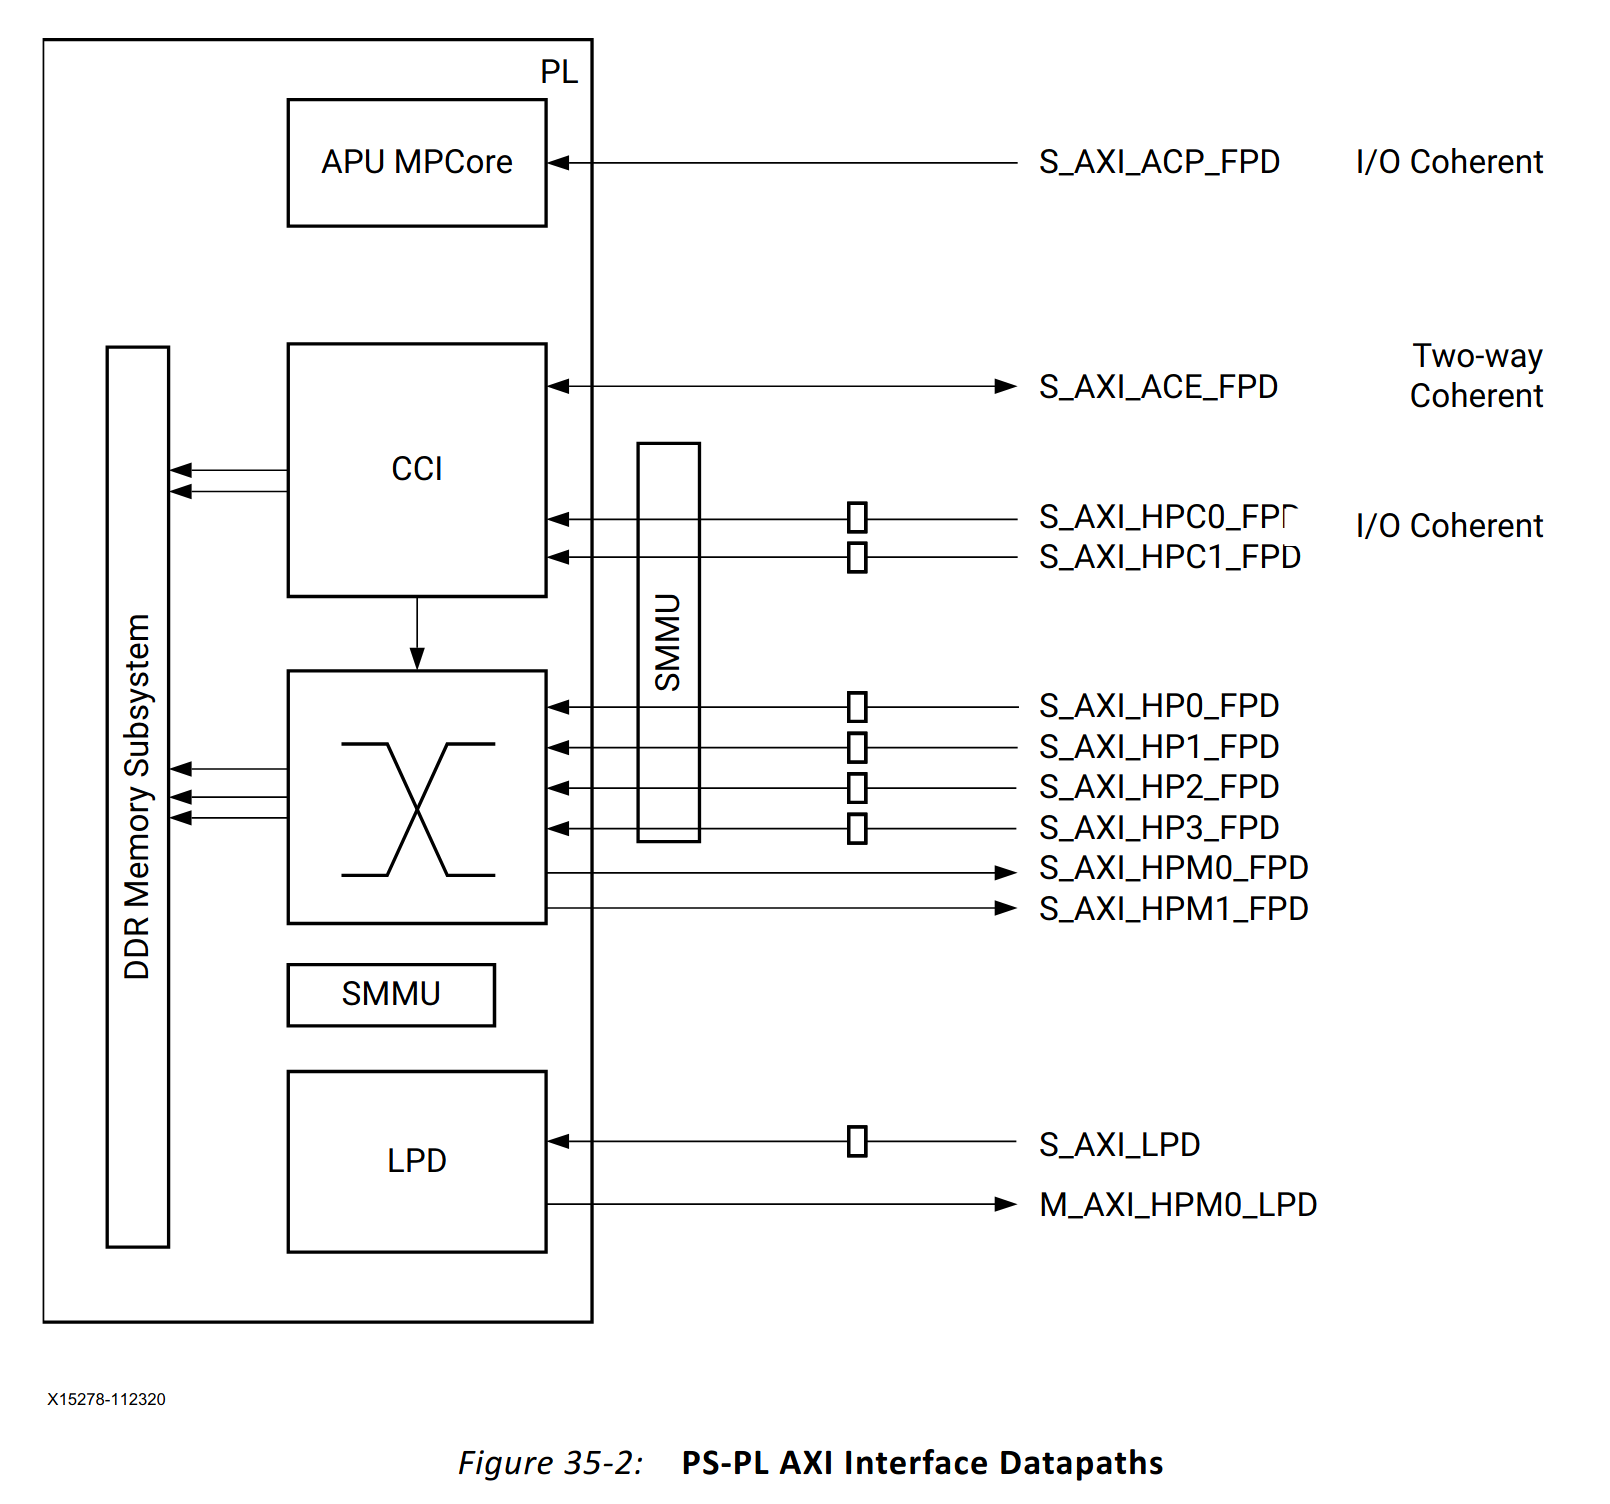 PS-PL AXI Interface Datapaths - from UG1085 (courtesy Xilinx)